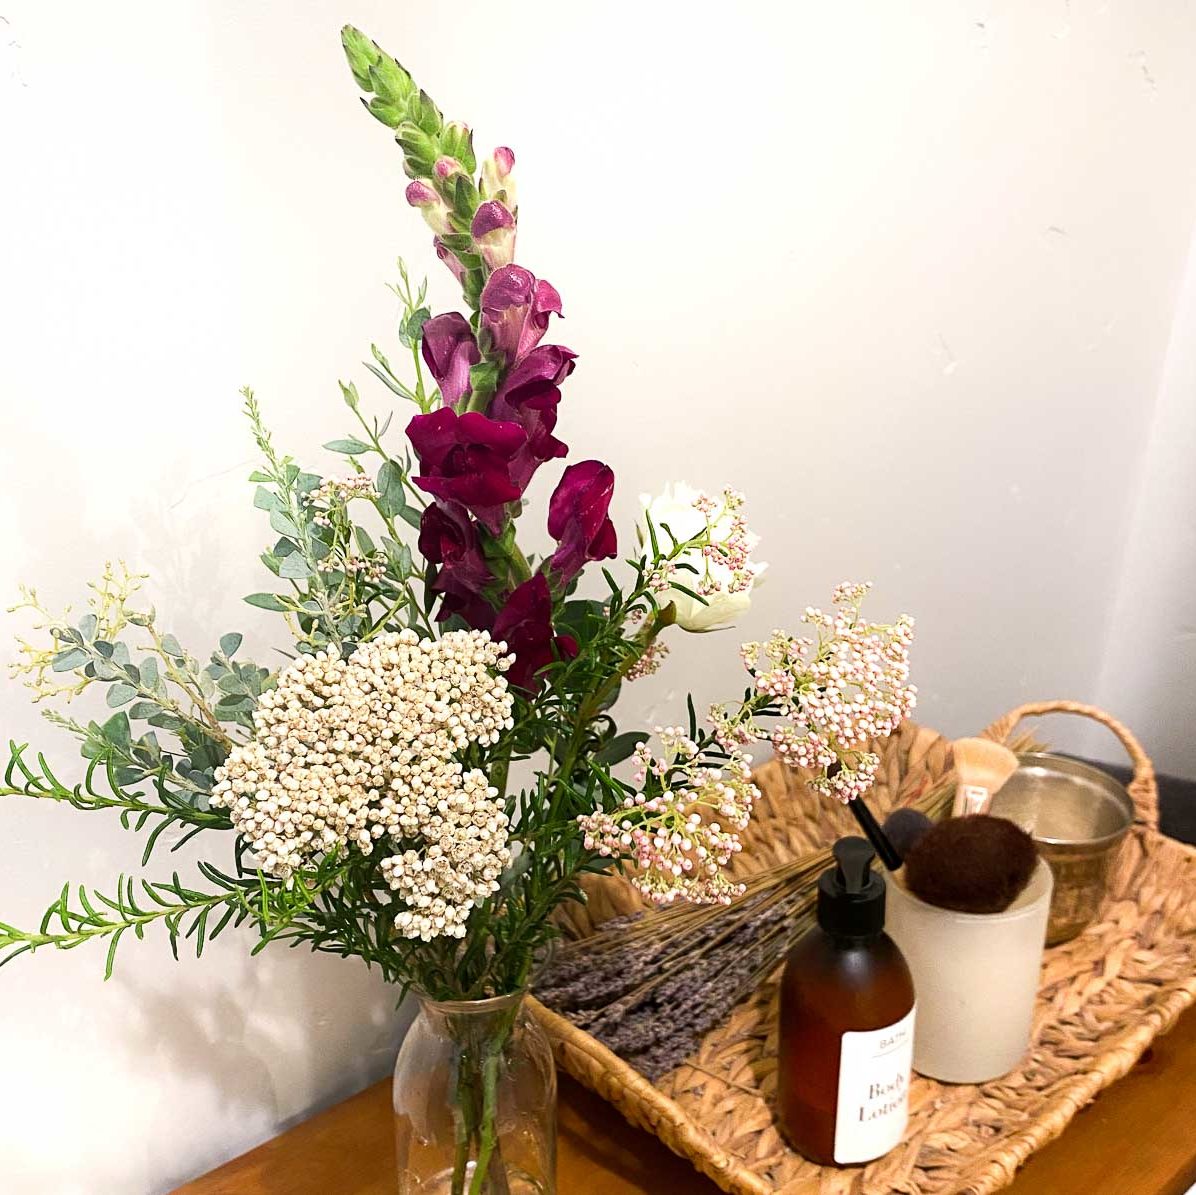 Sustainable Gift Ideas for Food Lovers - Local Flower Bouquet (sitting on bathroom counter)